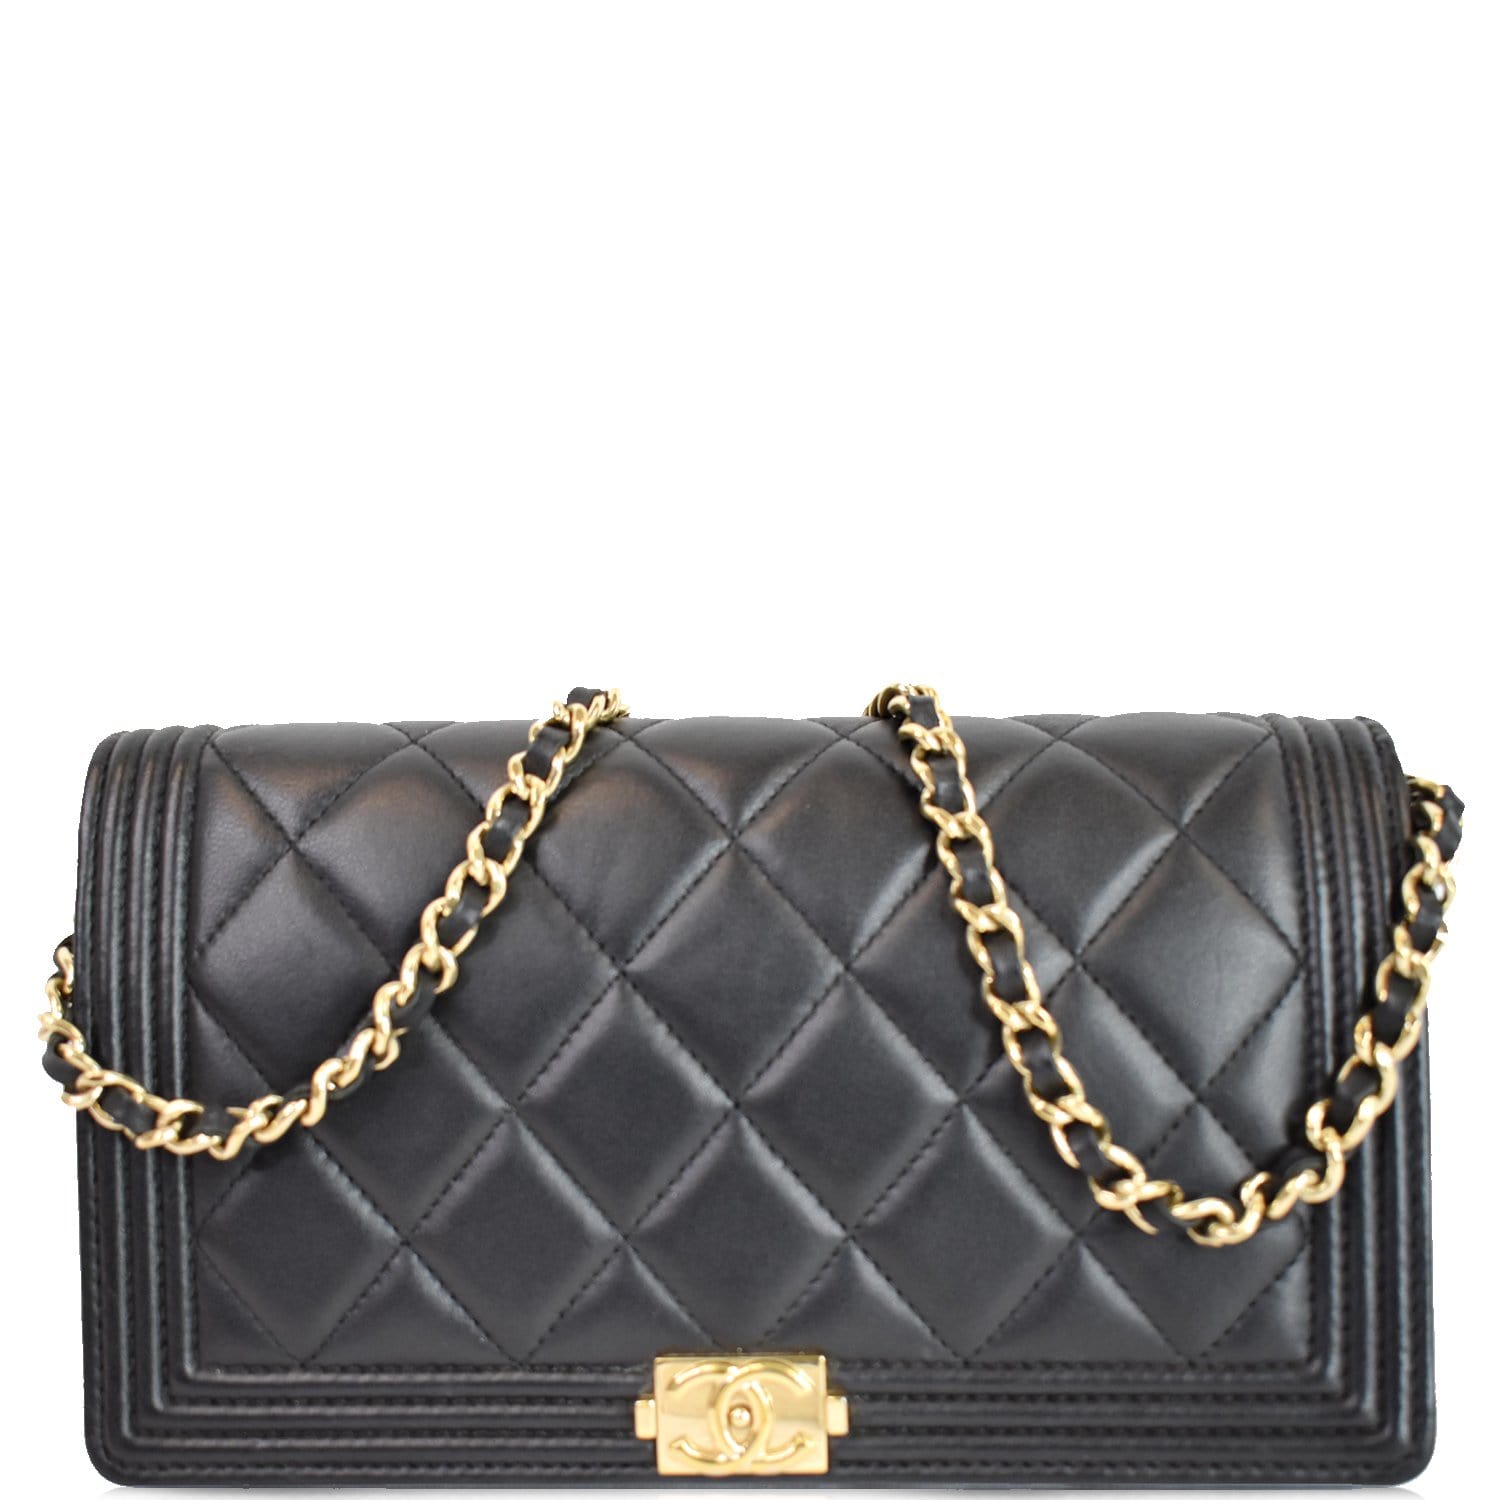 How to Turn Chanel WOC into a Top Handle Bag, wallet, Chanel, bag, chain